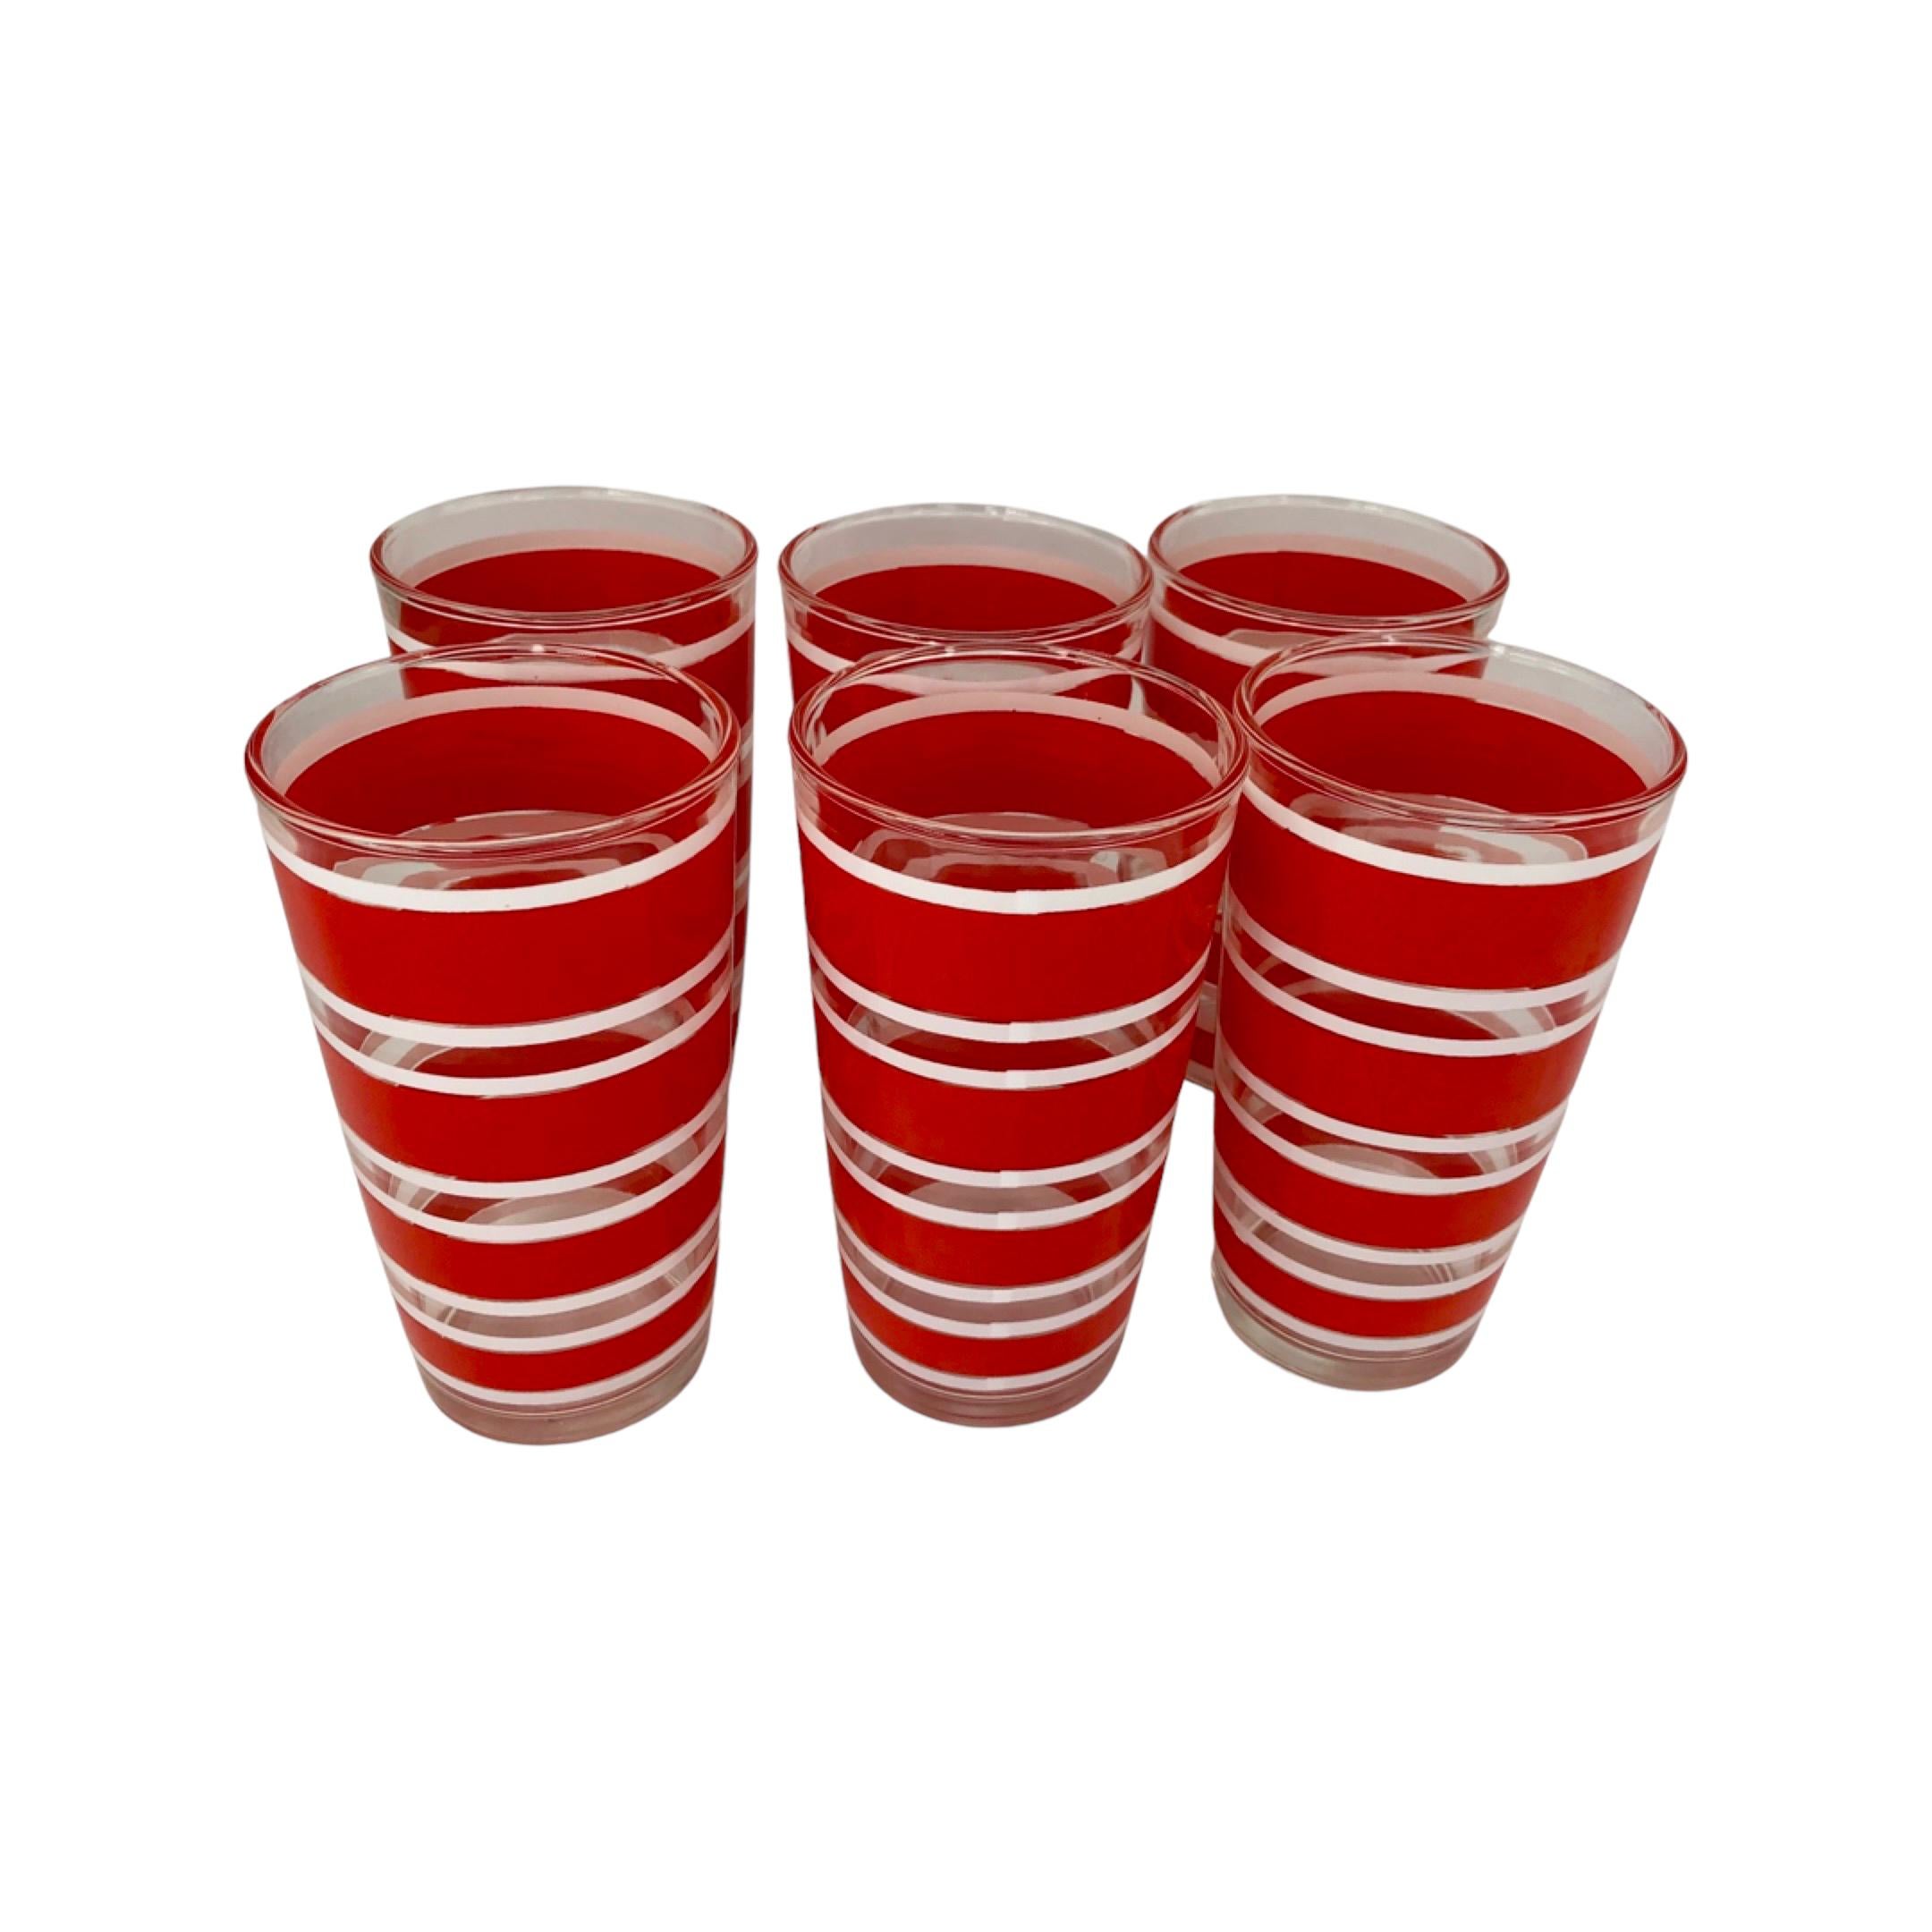 Set of 6 Vintage Hazel Atlas Red and White Banded Tumblers in Metal Caddy. Glasses measure 5 1/8